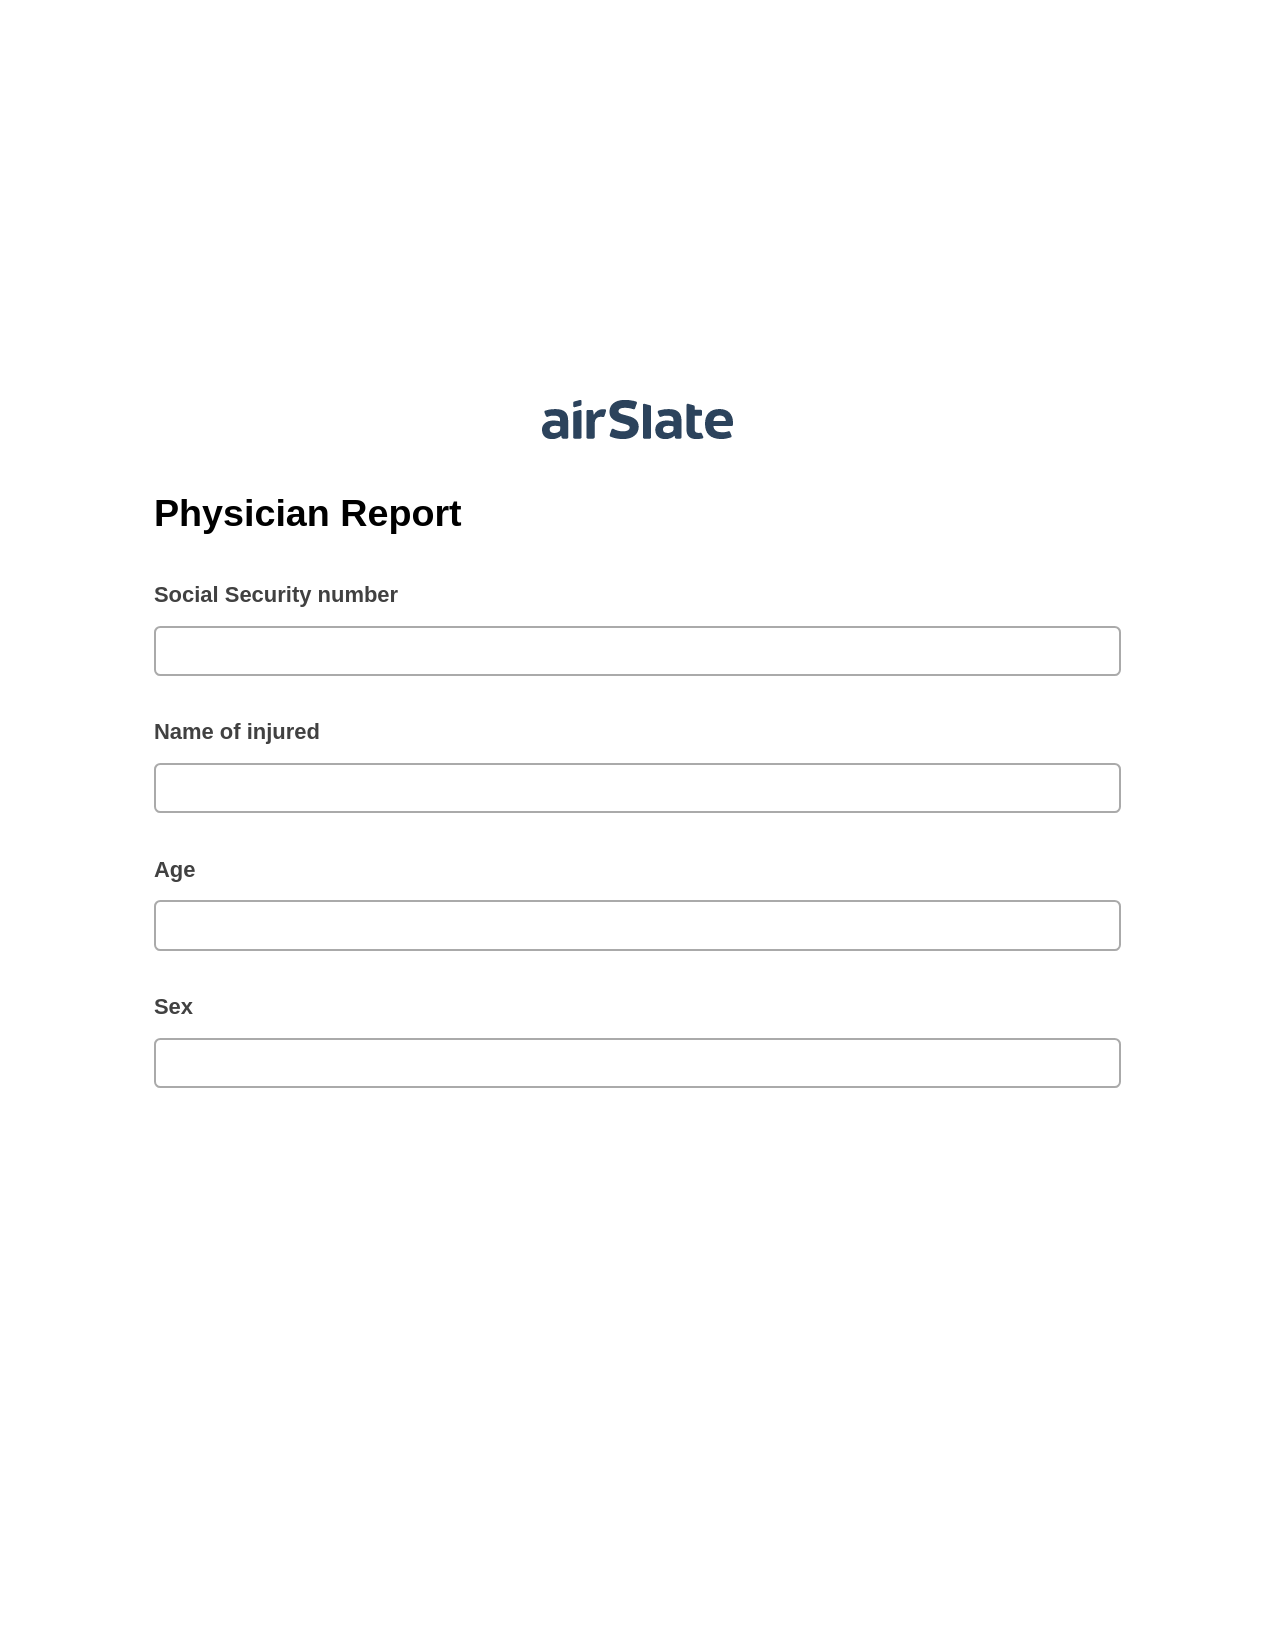 Physician Report Pre-fill Dropdowns from MySQL Bot, Send a Slate to MS Dynamics 365 Contact Bot, Archive to Box Bot